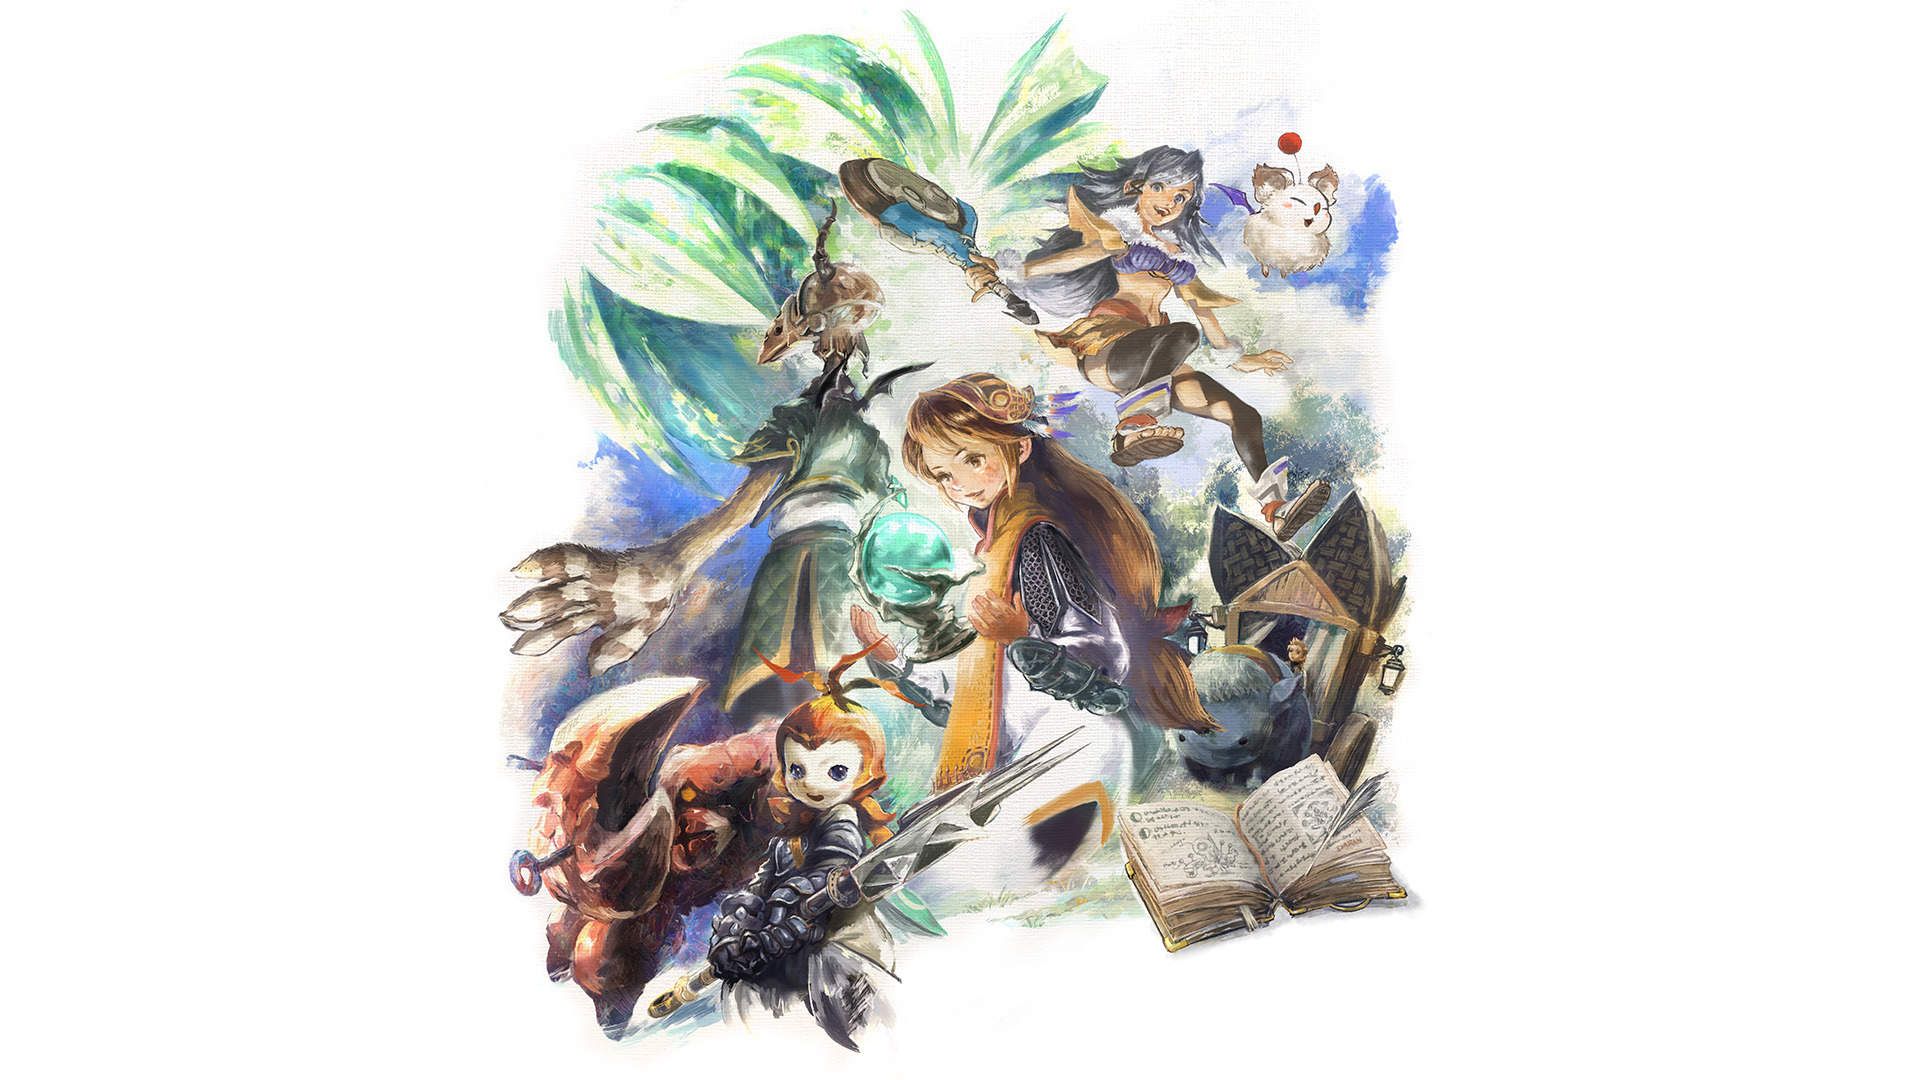 Final Fantasy Crystal Chronicles Remastered Edition E3 Reveals it will Release this Winter